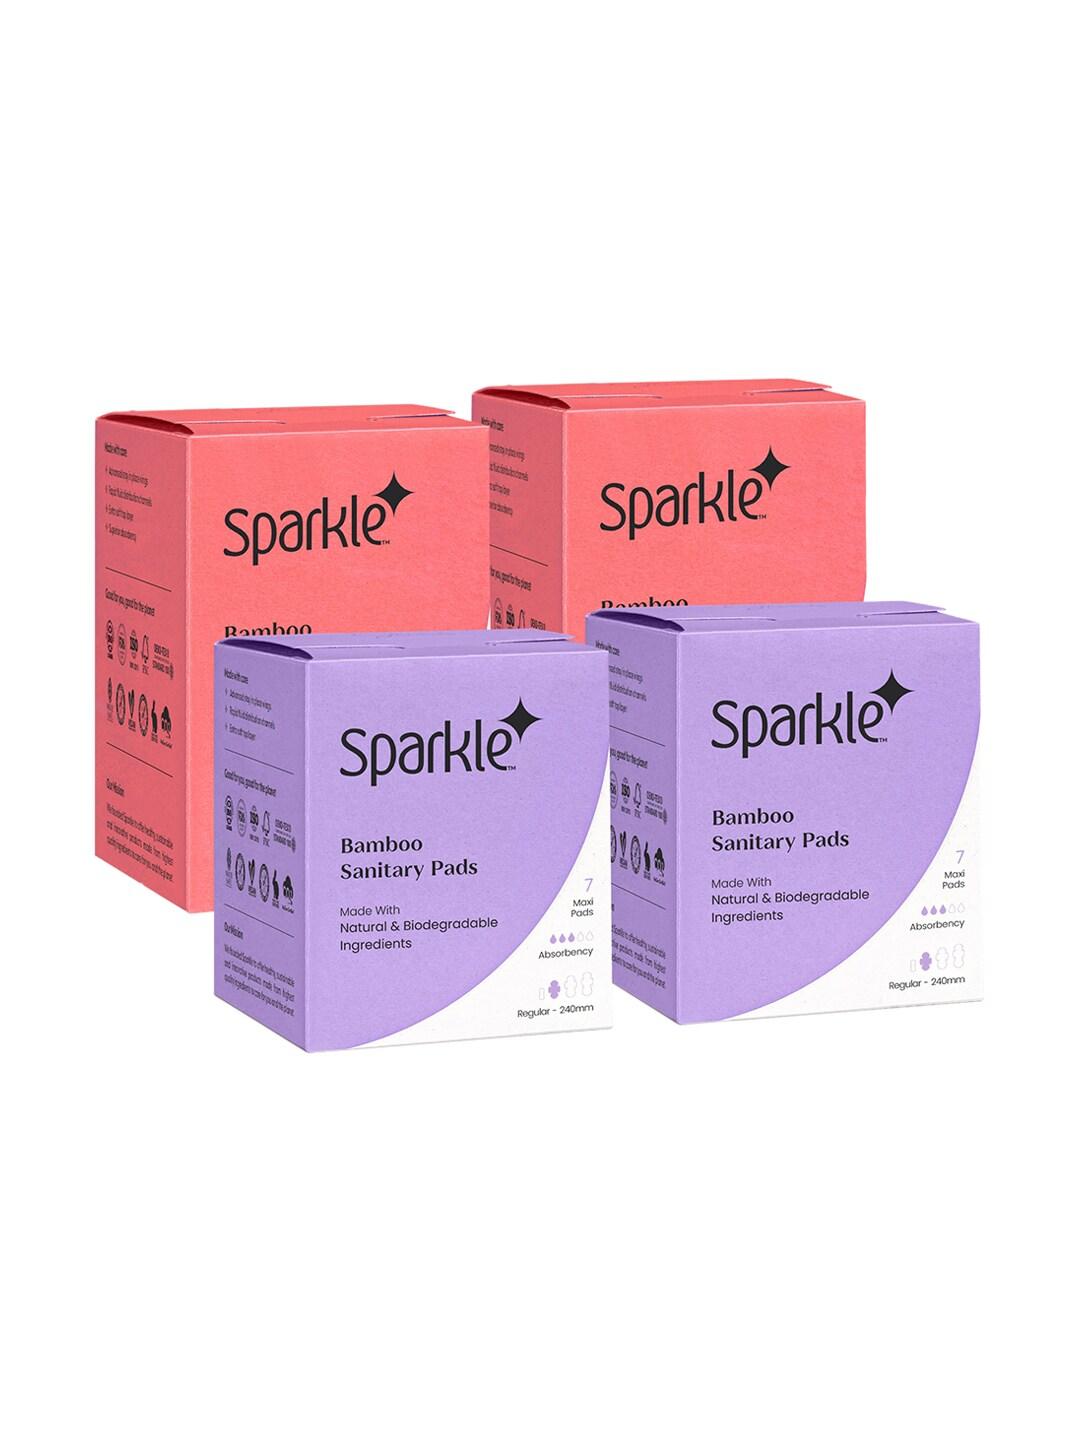 Sparkle Pack of 4 Bamboo Sanitary Pads- Regular 240mm & Overnight 280mm-2 Pack Each